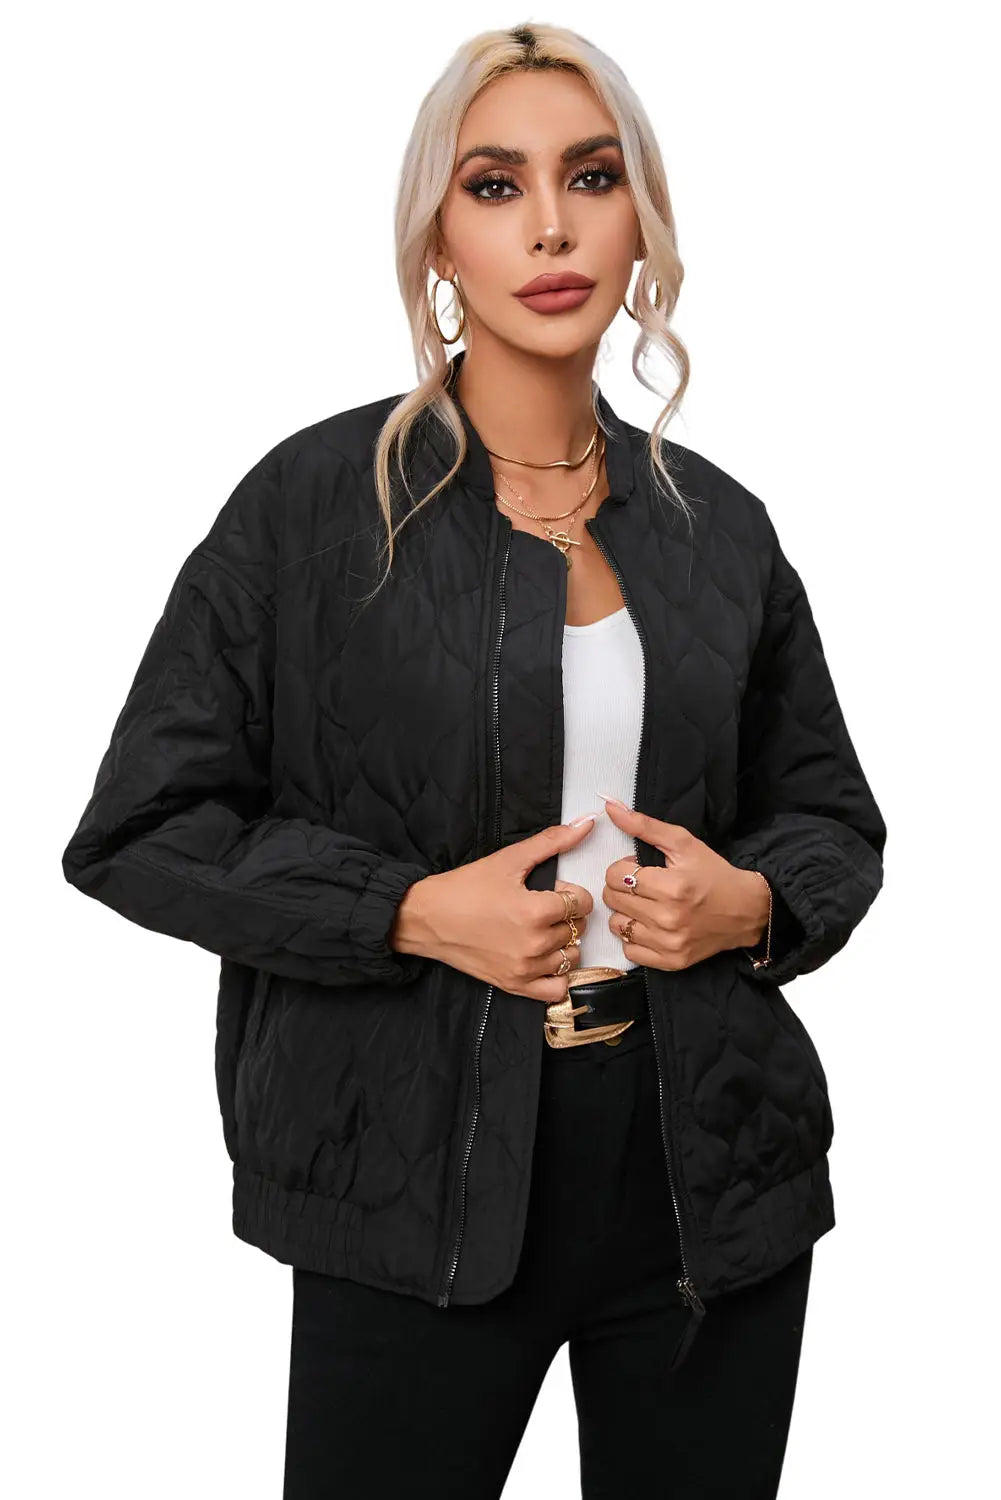 Black solid color quilted zip up puffer jacket - jackets